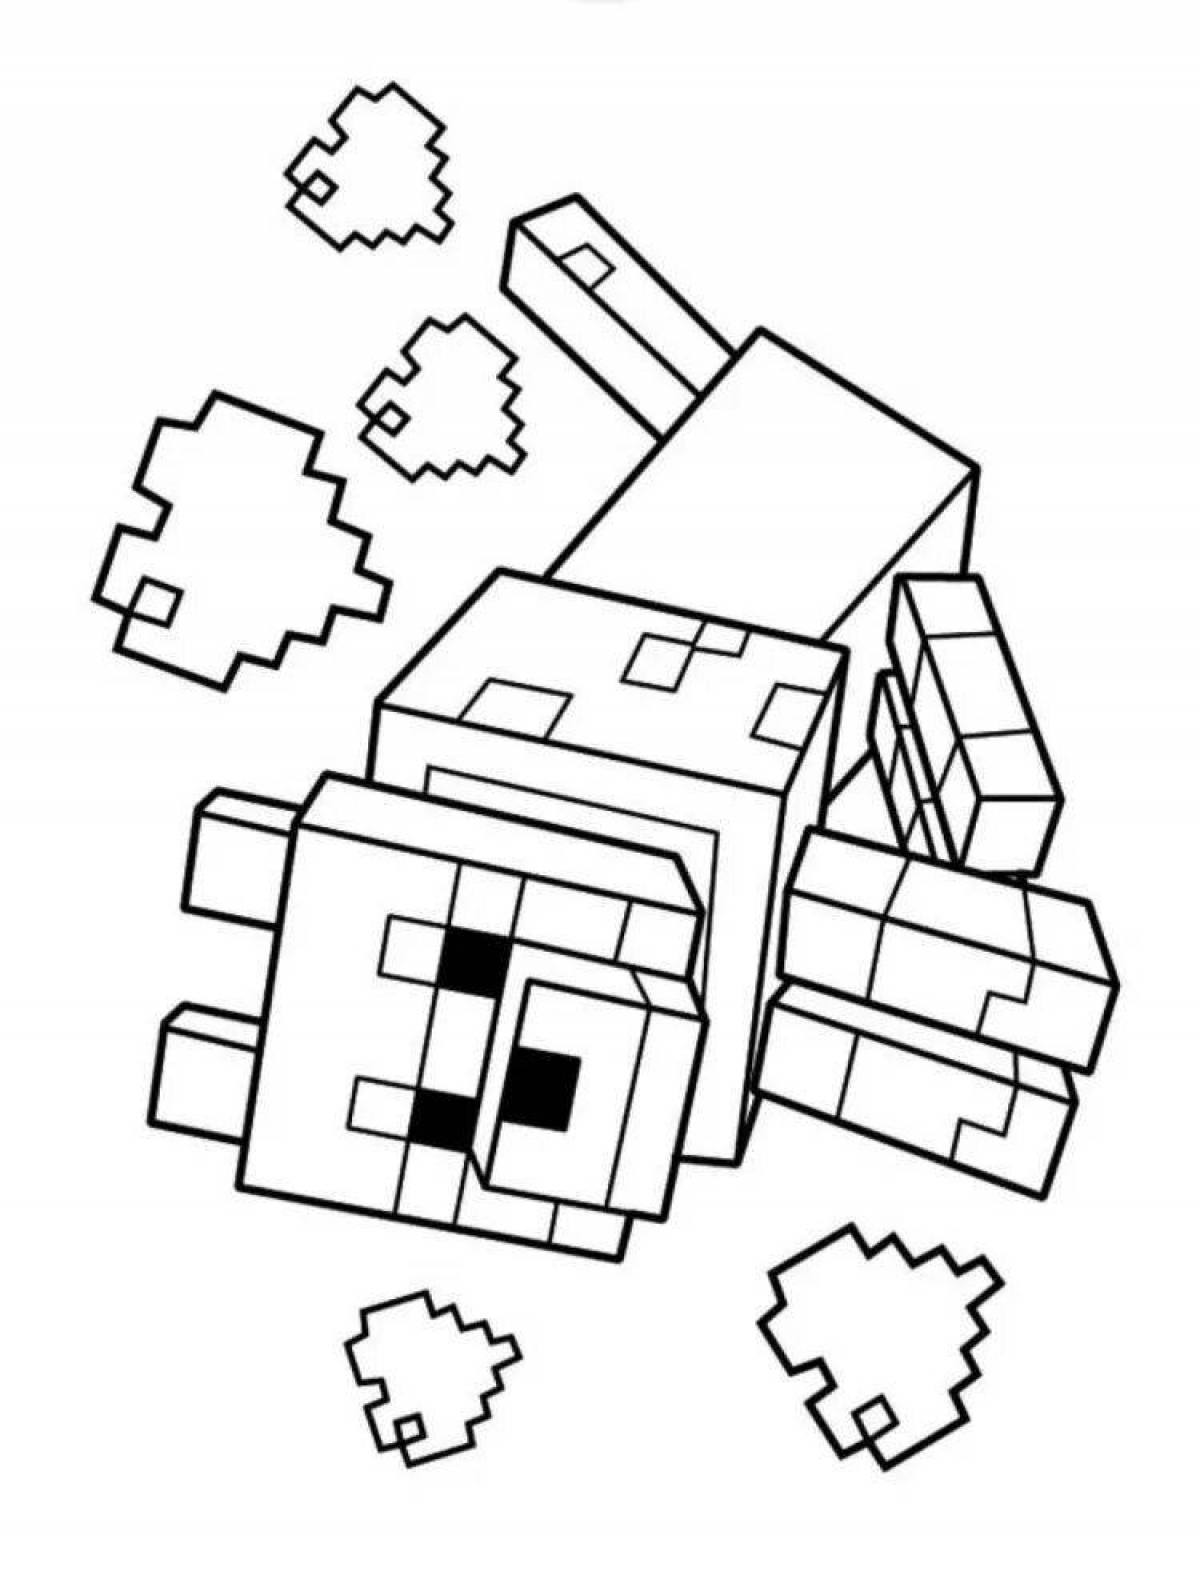 Fairytale lego minecraft coloring page